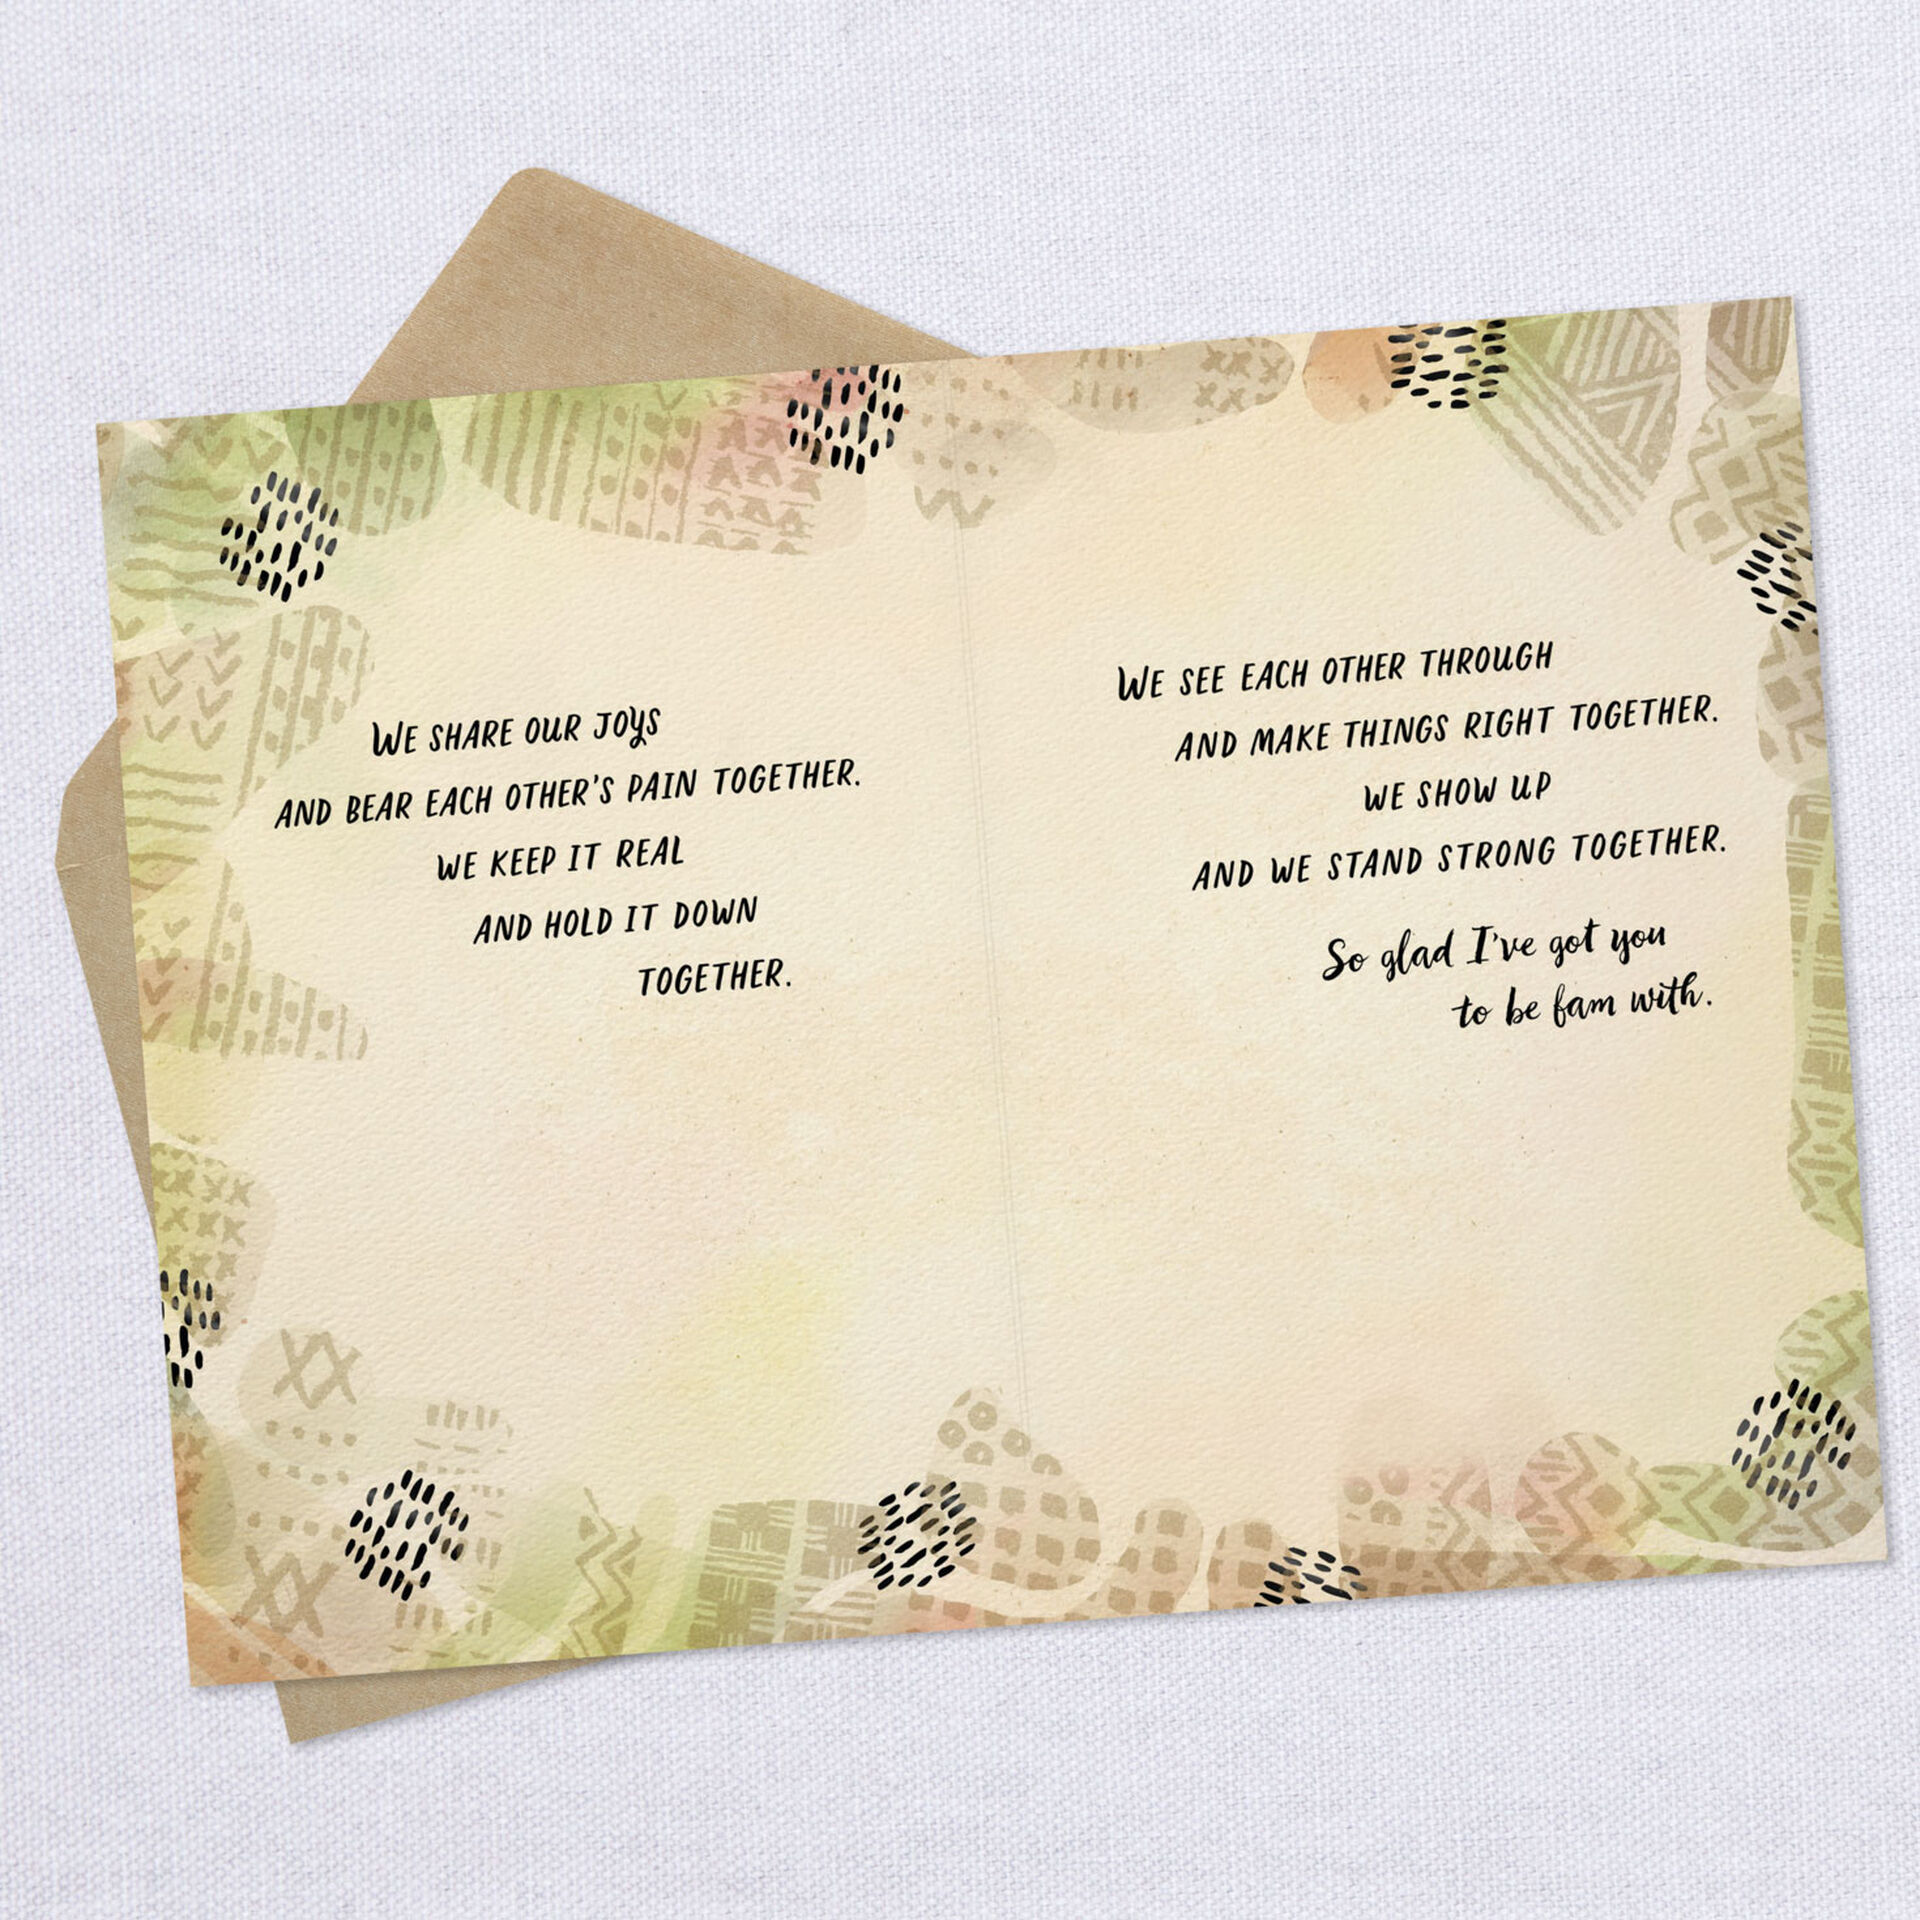 Lettering-&-Patterns-Stand-Together-Encouragement-Card_399MHF1138_04